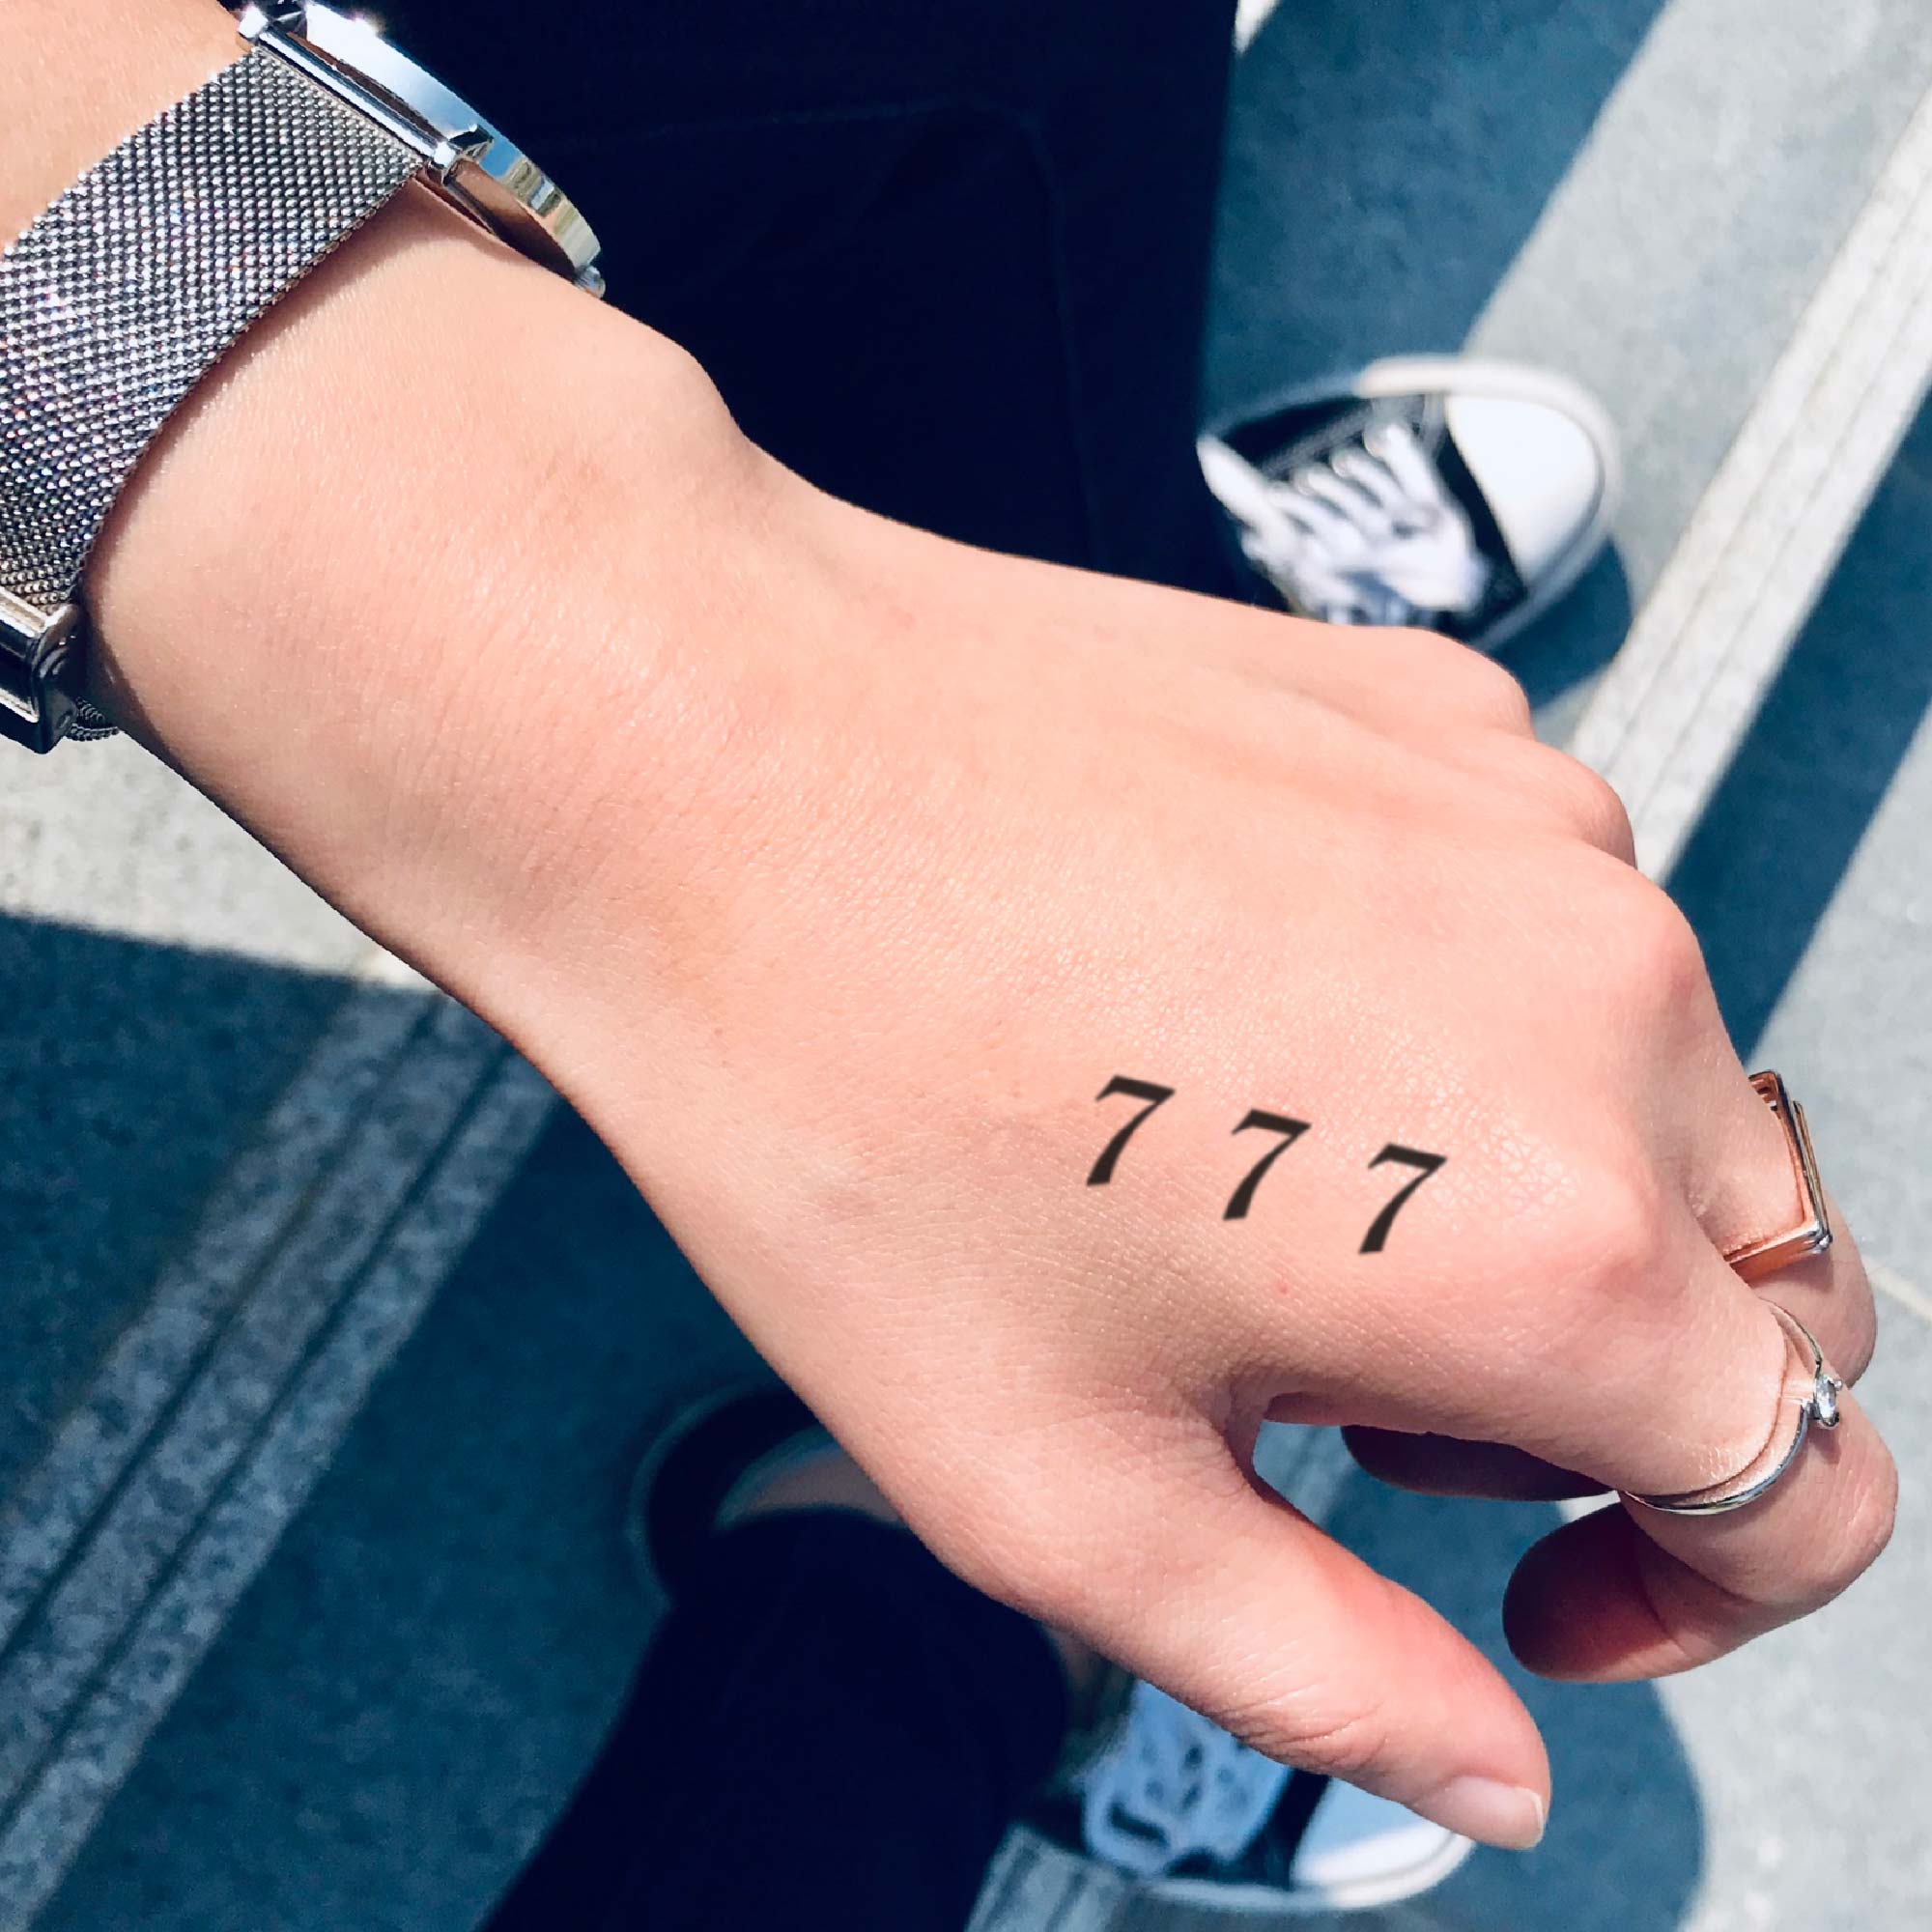 Lucky number 777 tattooed on the bicep